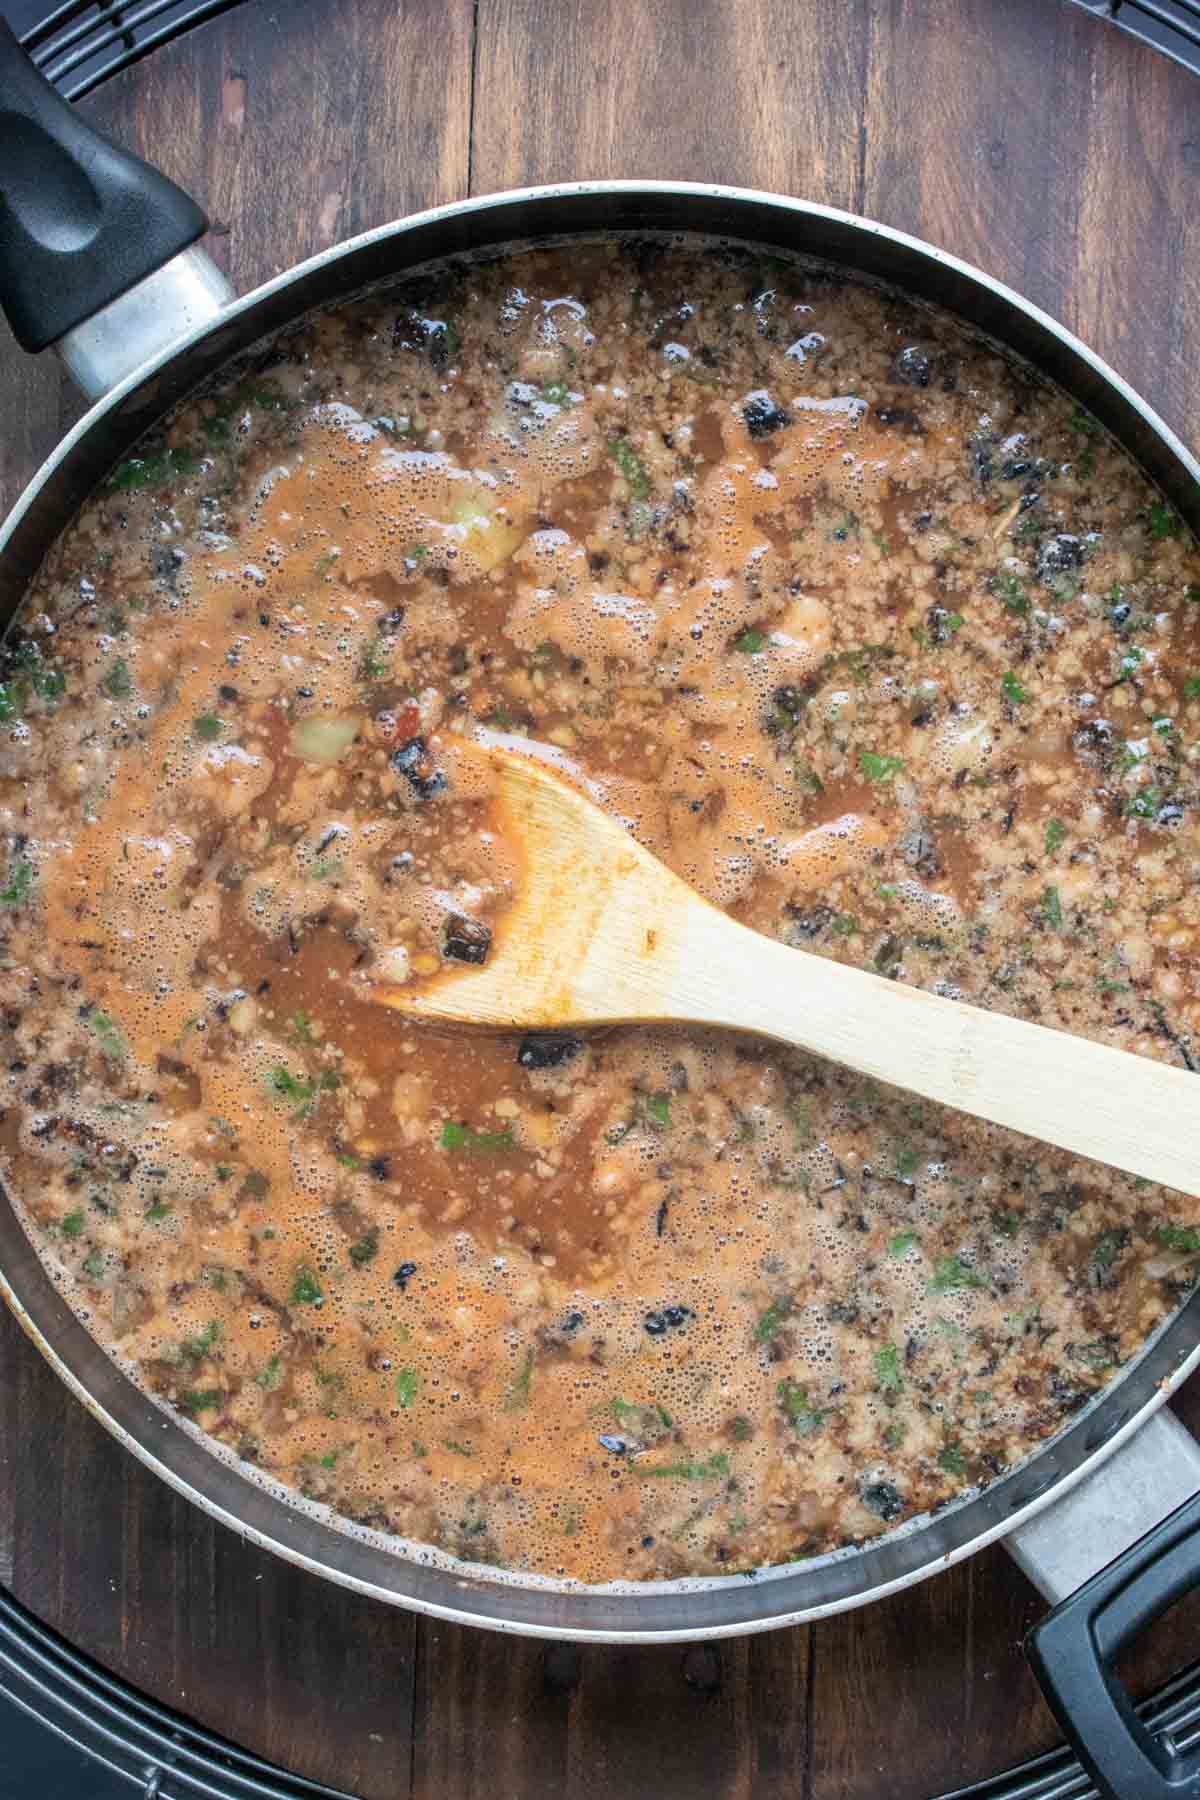 A wooden spoon mixing a brown liquid with lentils in it in a pan.